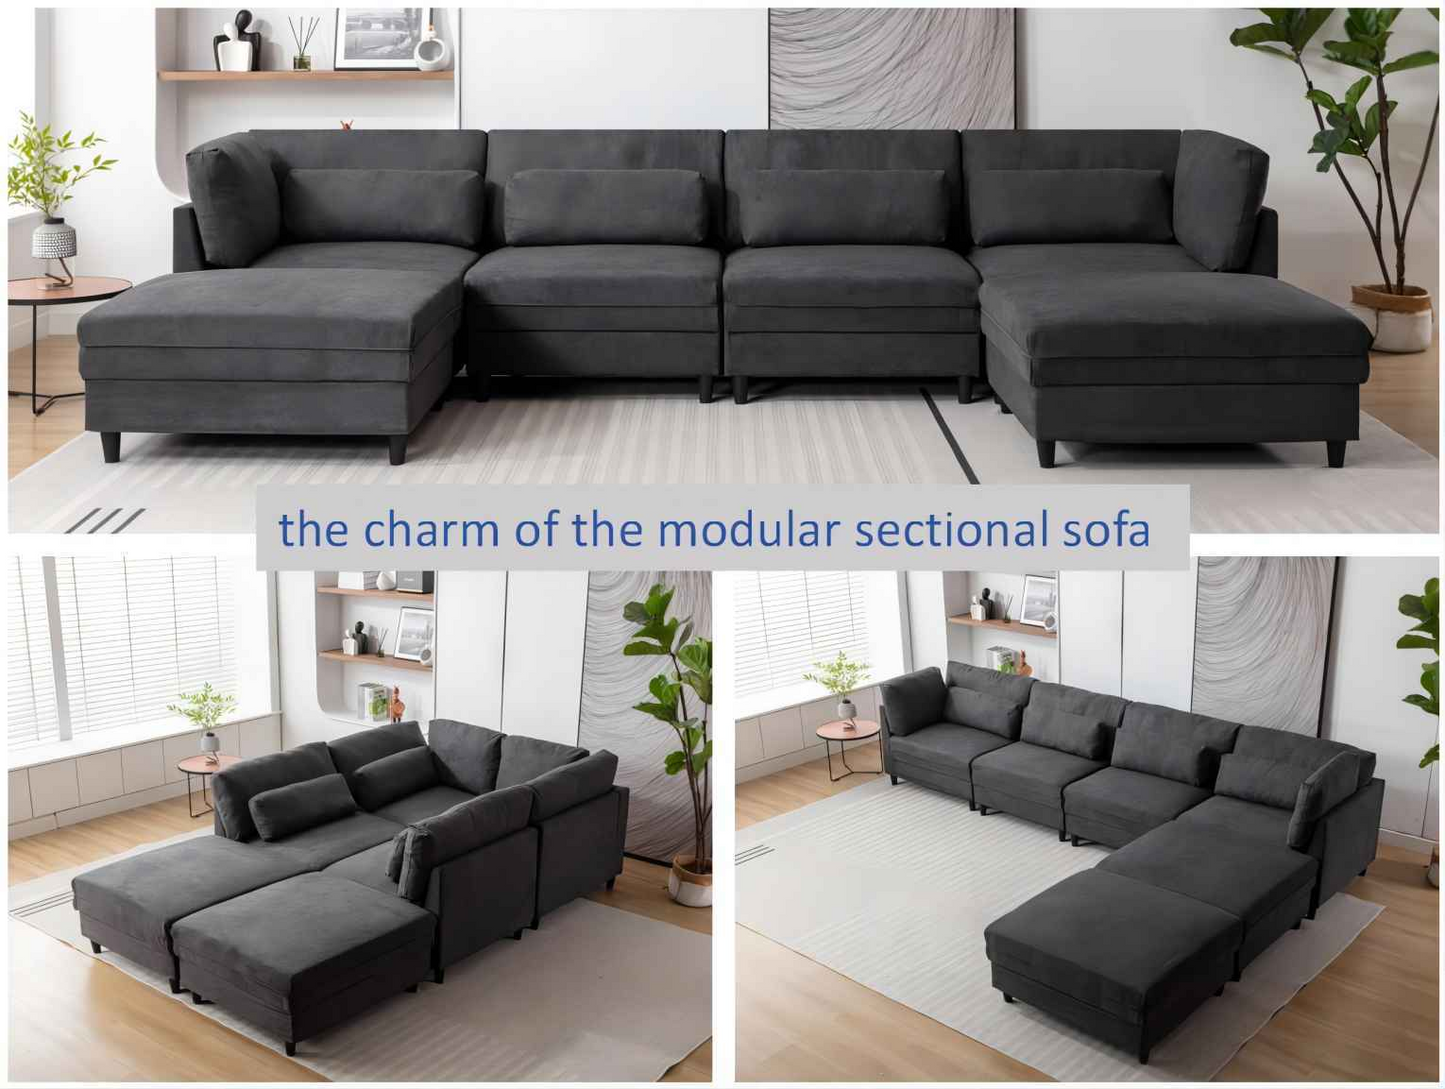 Oversized Modular Sectional Fabric Sofa Set with 6pcs Pillows, Extra Large U Shaped Couch with Reversible Chaise, 145 inch Long, 6 Seat Modular Sofa with  Ottamans, Goodies N Stuff